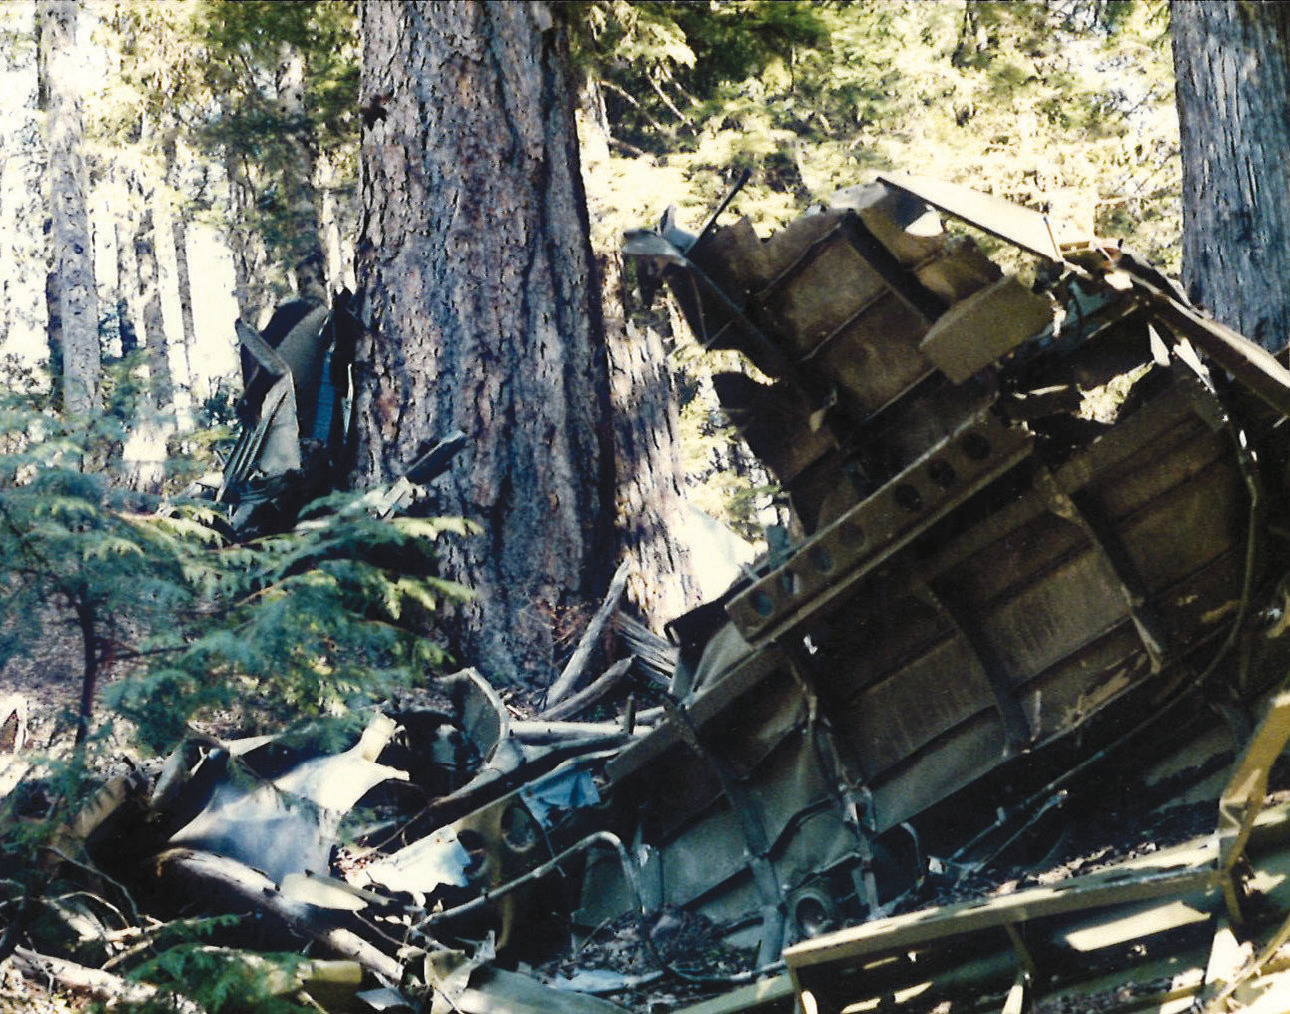 Crash site of PV-1 Ventura No. 49459 on the southeast side of Mount St. Helens.